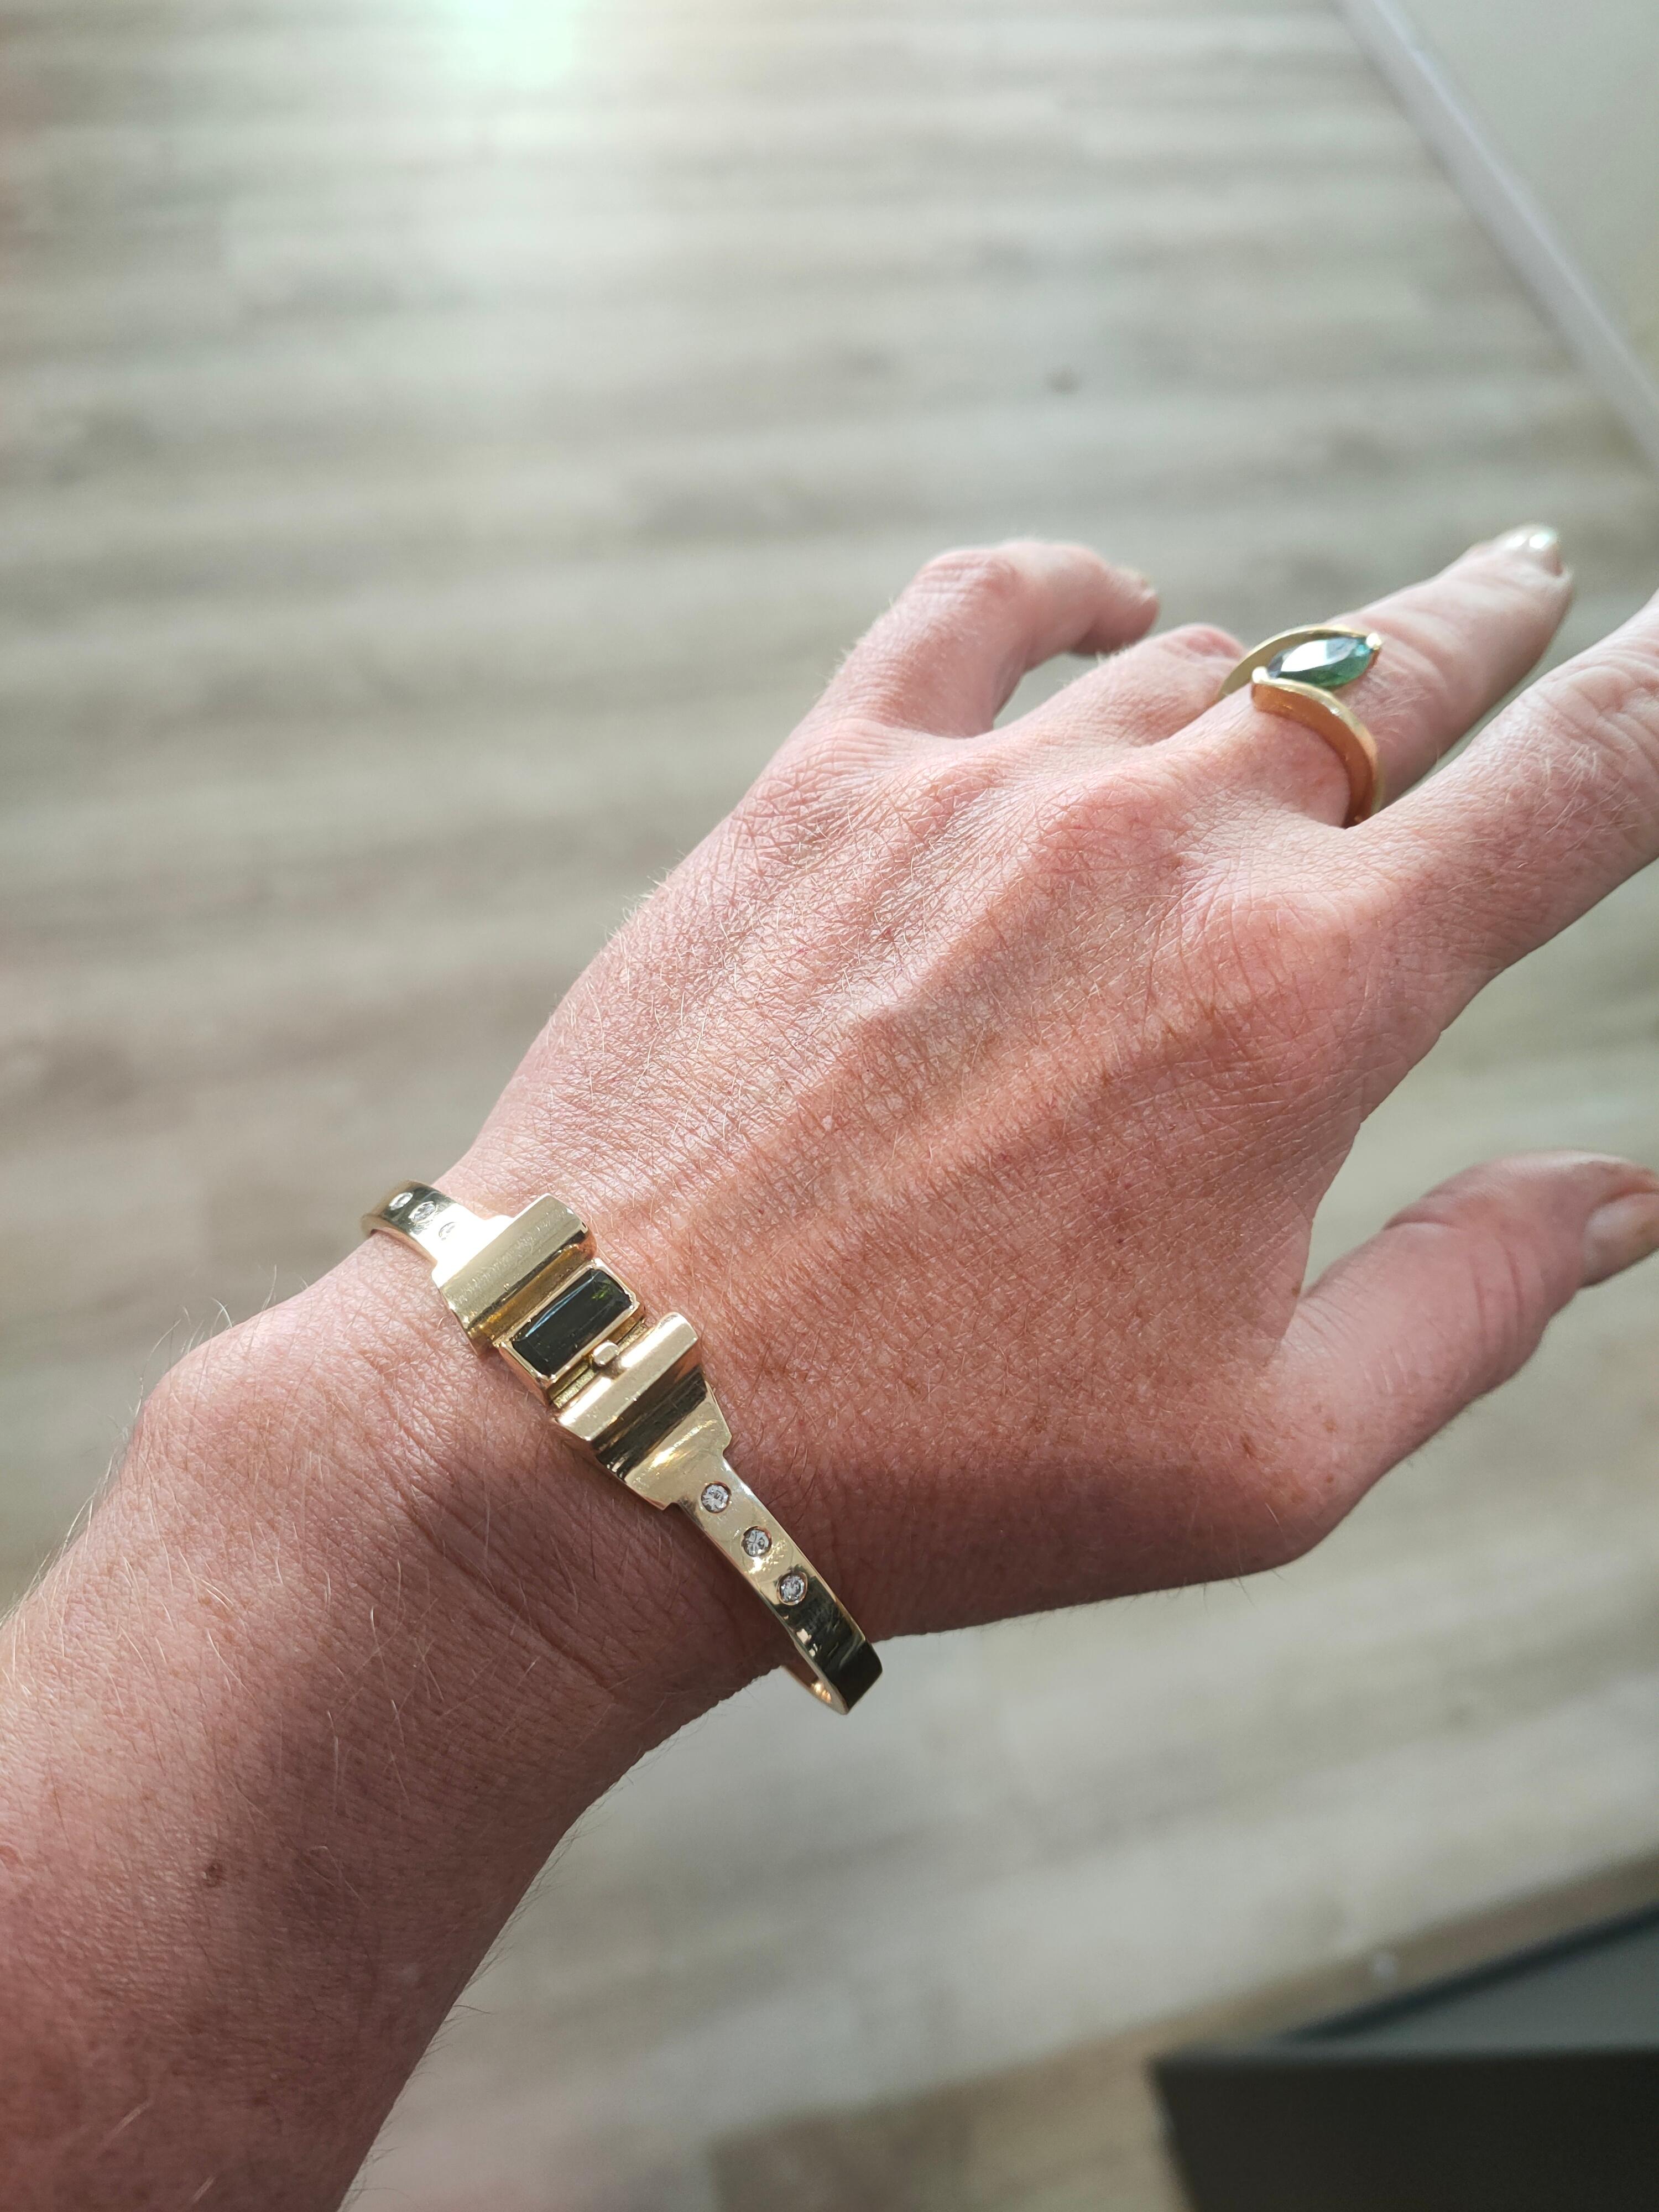 [specs below..]

With this 14 karat yellow gold bracelet, you are seriously wearing something. The bracelet weighs a total of 47 grams, making it pleasant to wear but palpably exclusive. In the middle of the Amsterdam School-based bracelet is the